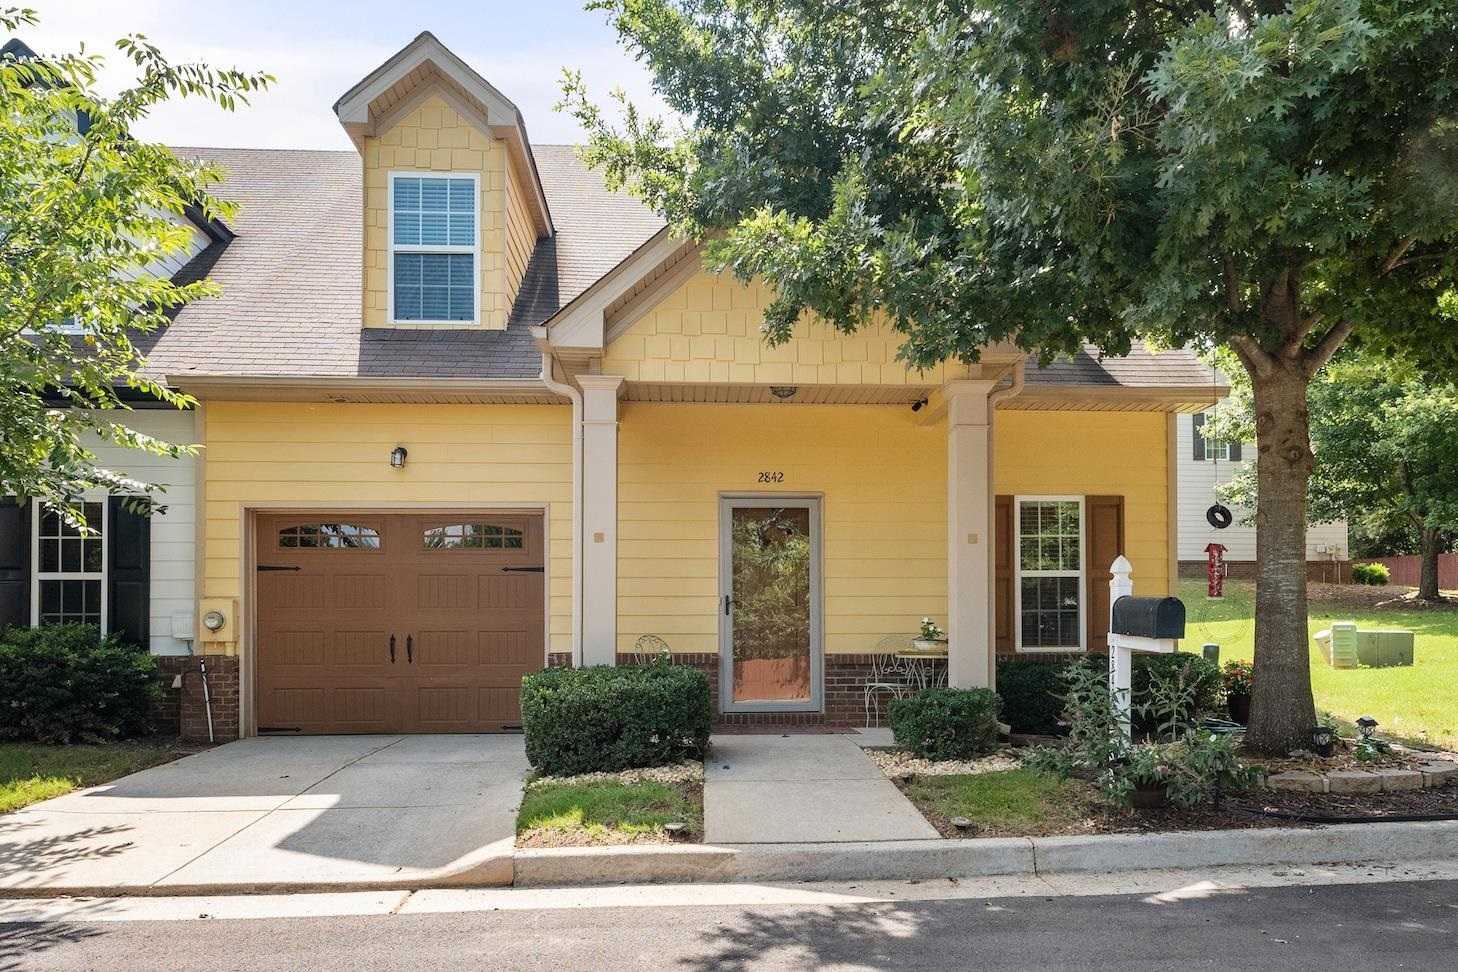 View GAINESVILLE, GA 30504 townhome